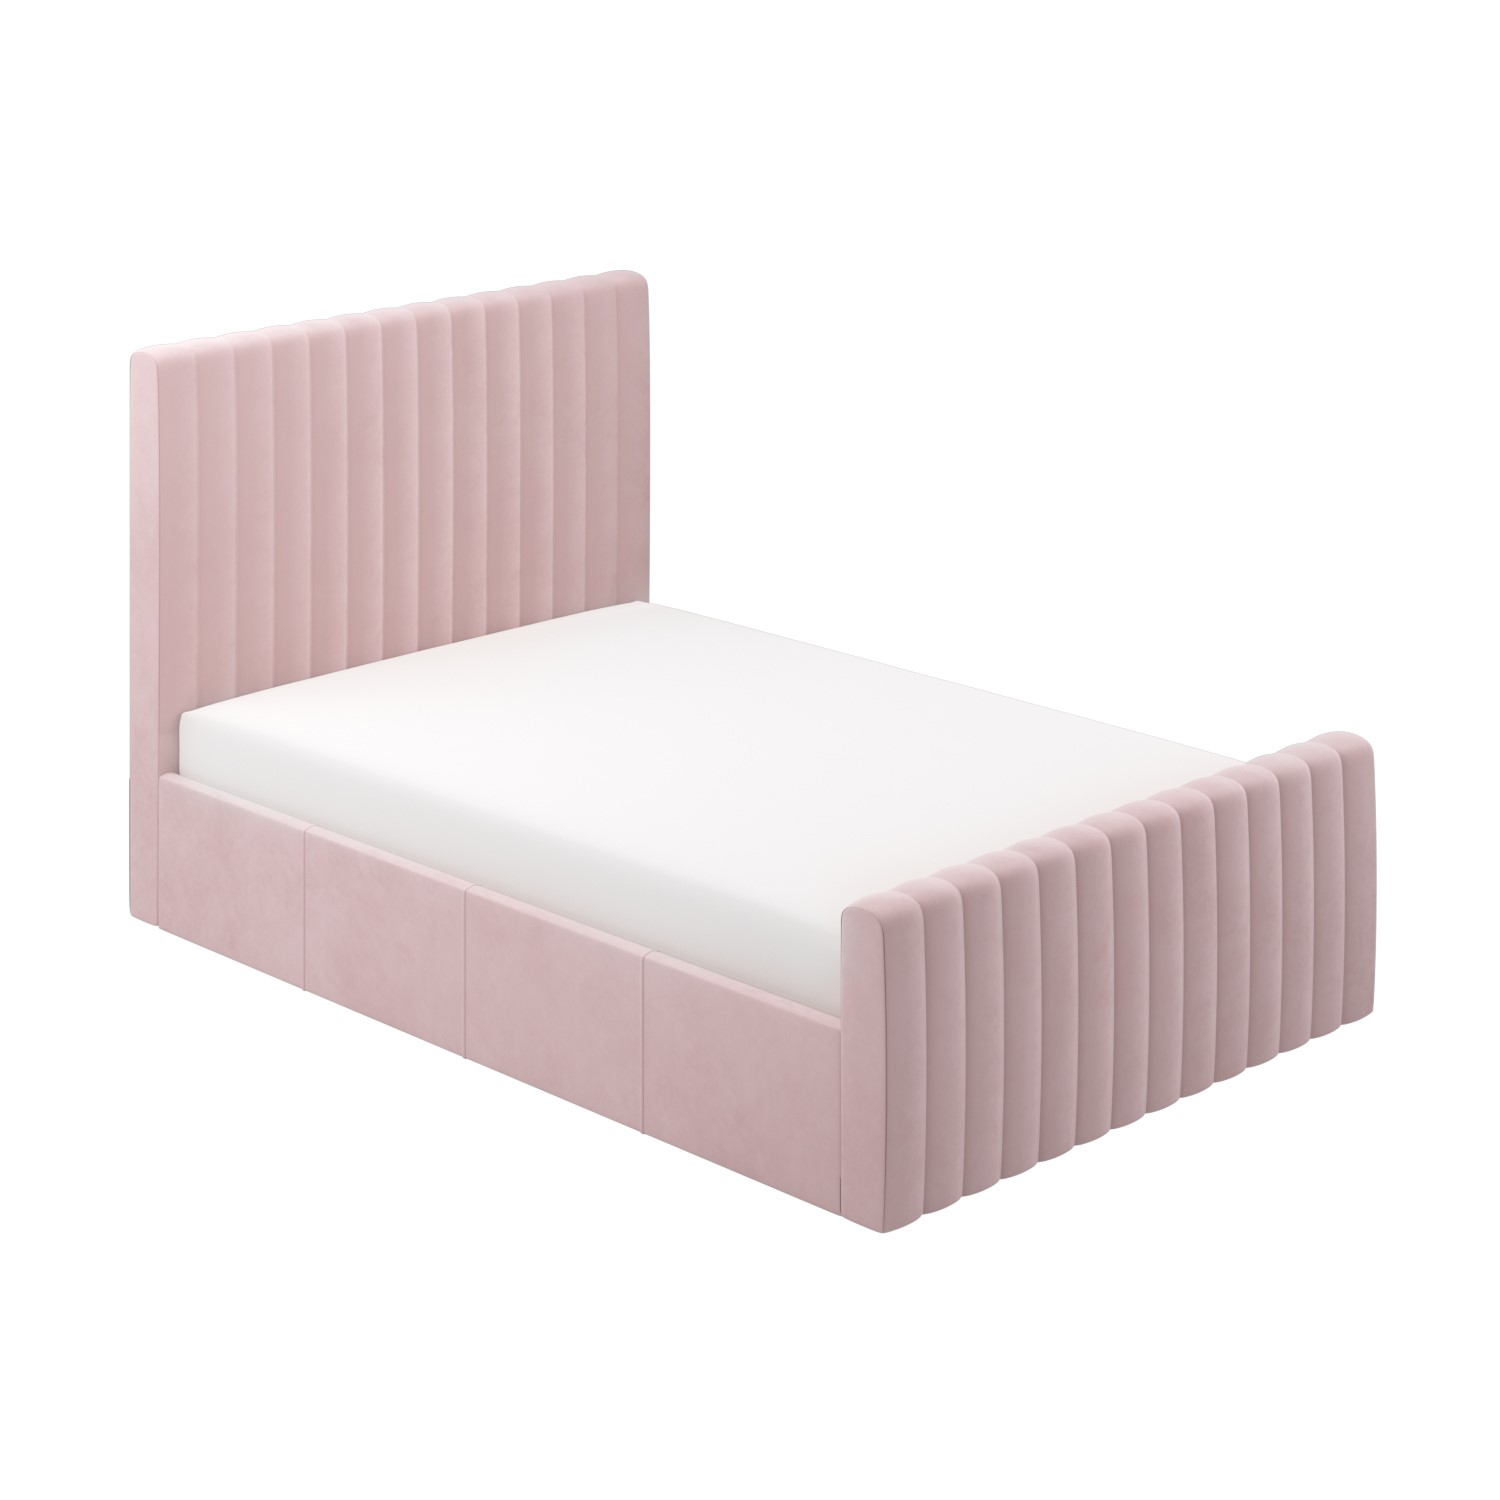 Khloe Double Side Ottoman Bed In Baby, Baby Pink Leather Chair And Ottoman Bed Set